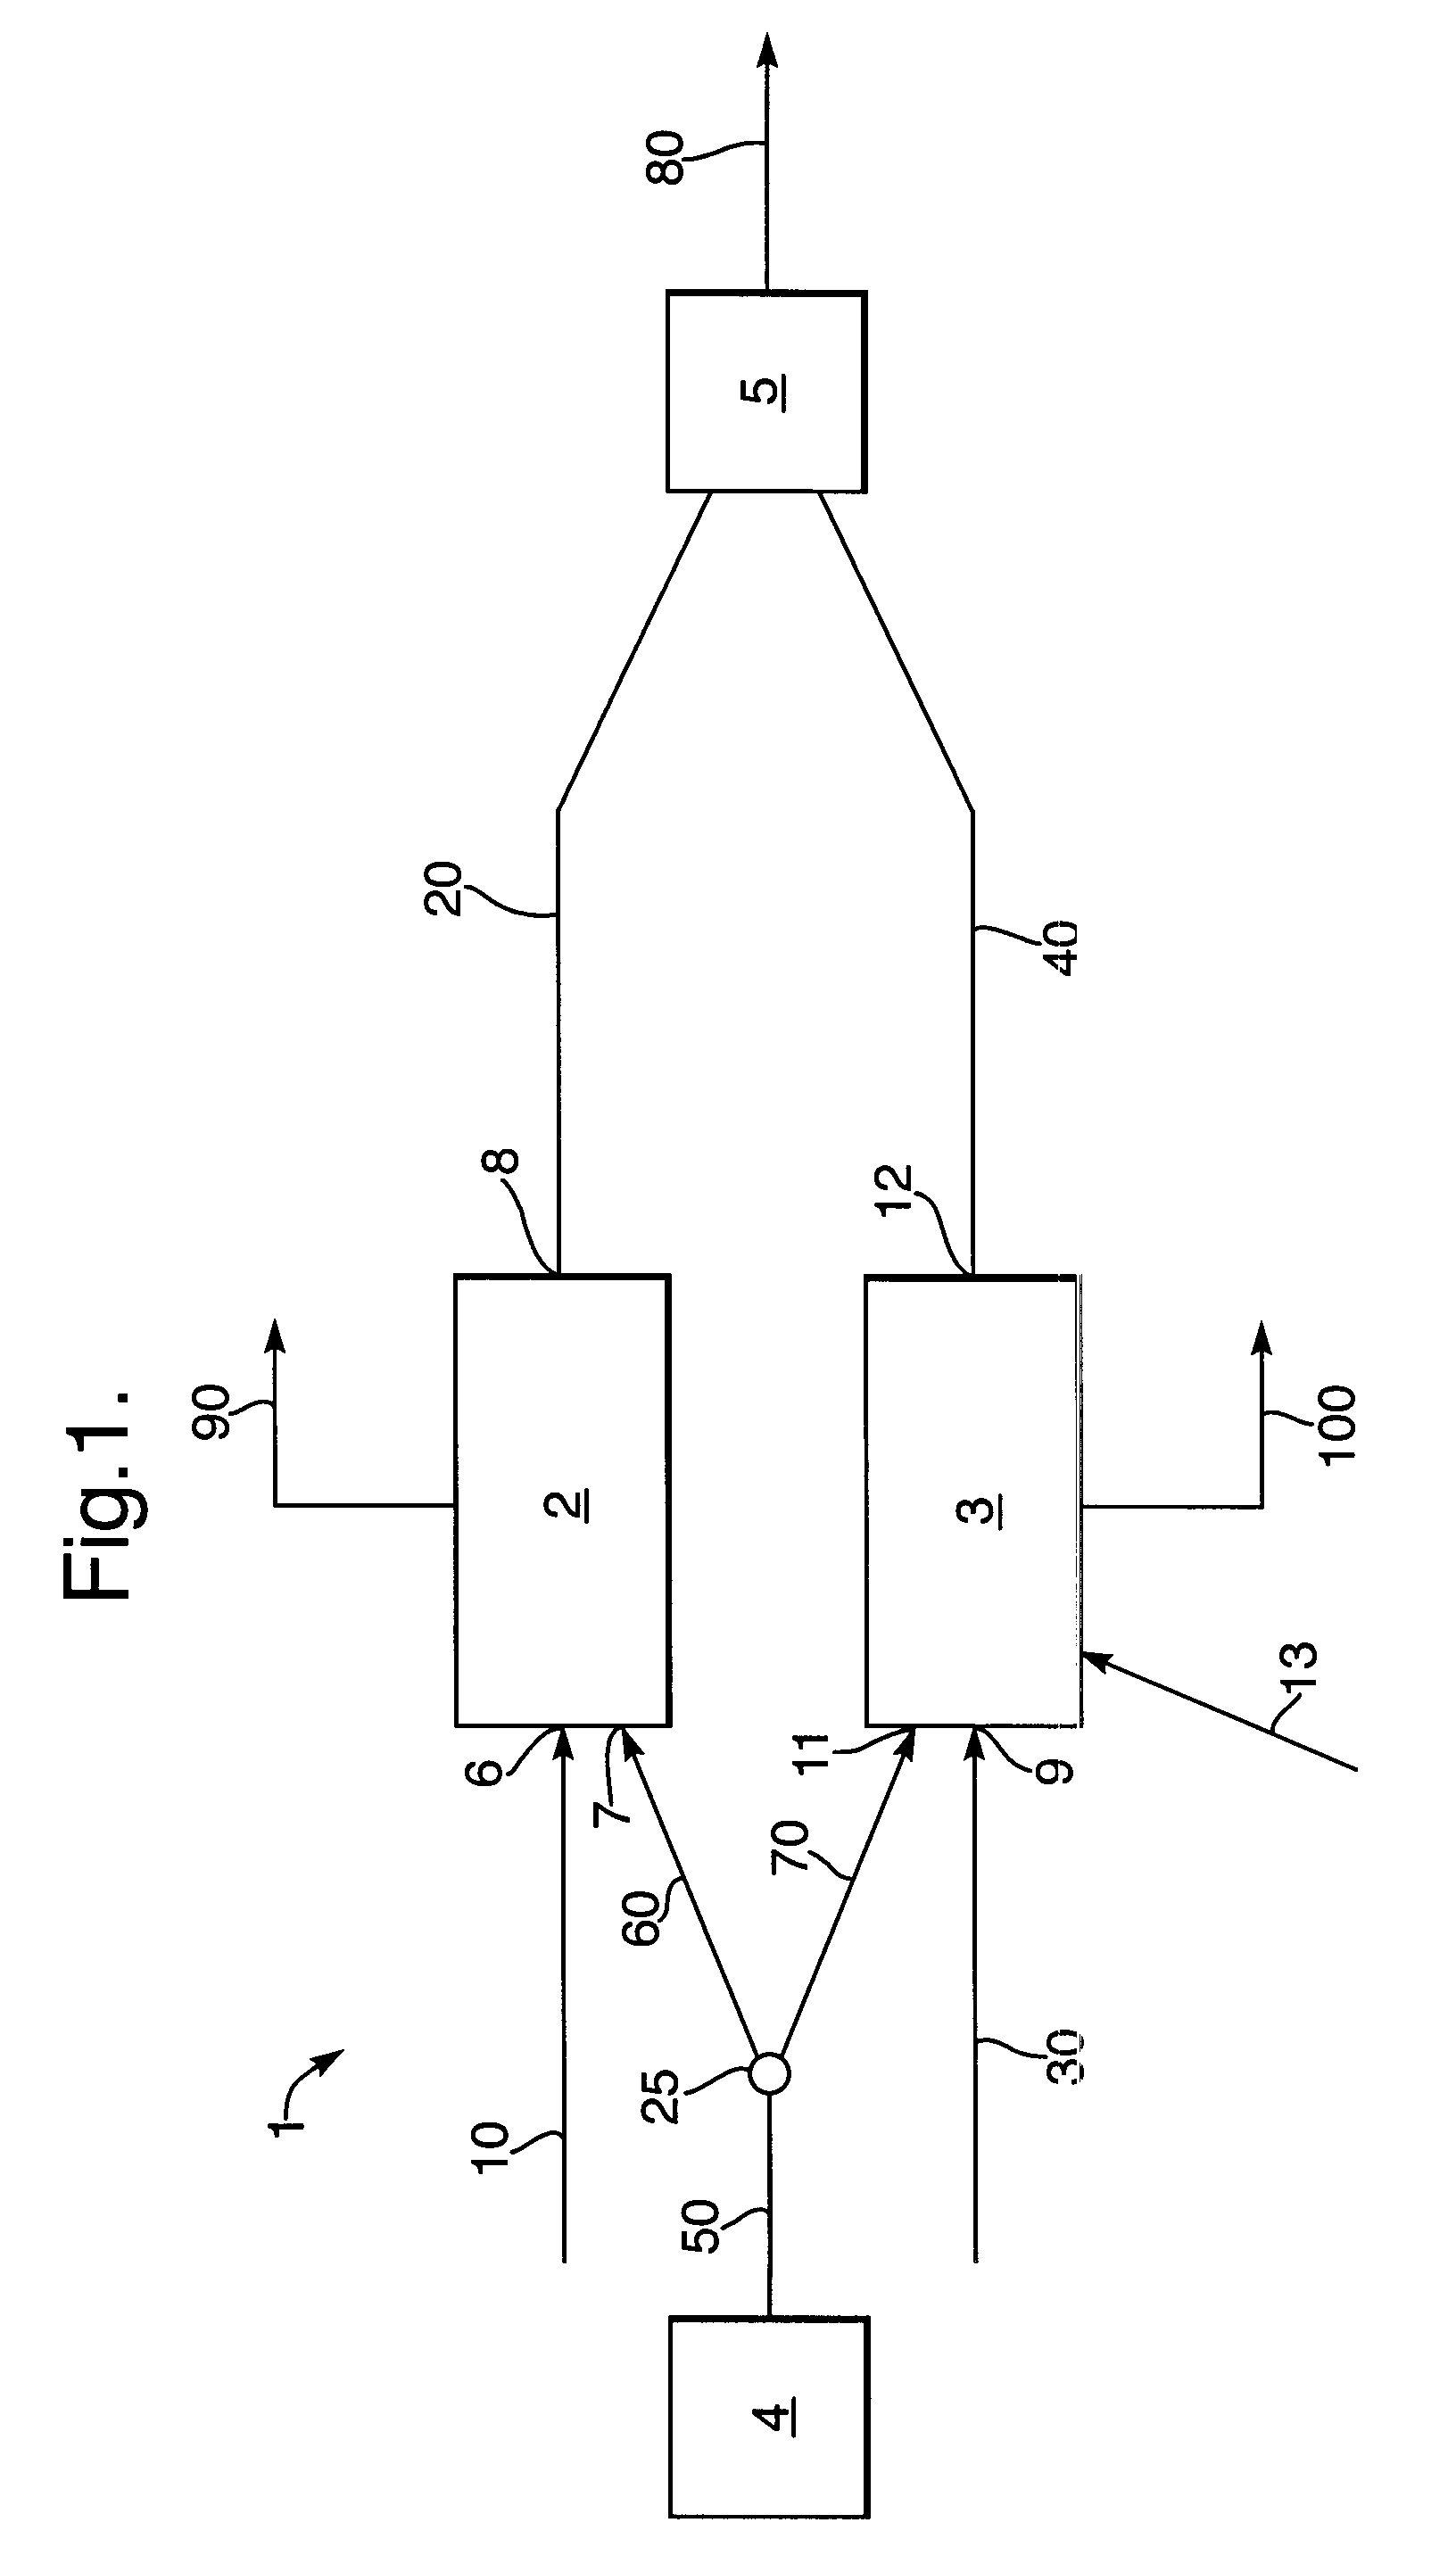 Systems and methods for producing synthesis gas